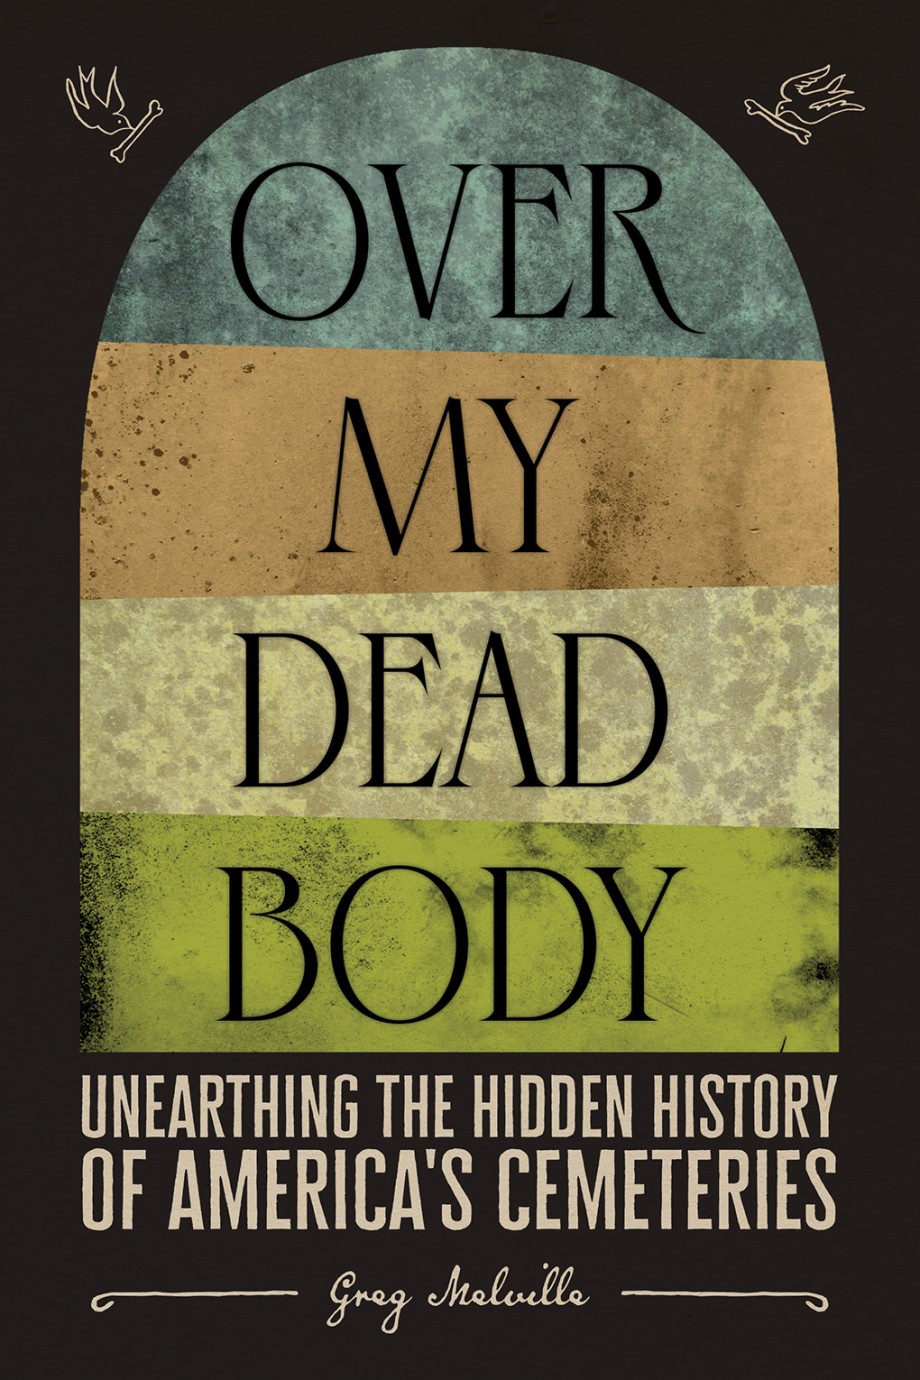 Over My Dead Body Unearthing the Hidden History of America’s Cemeteries